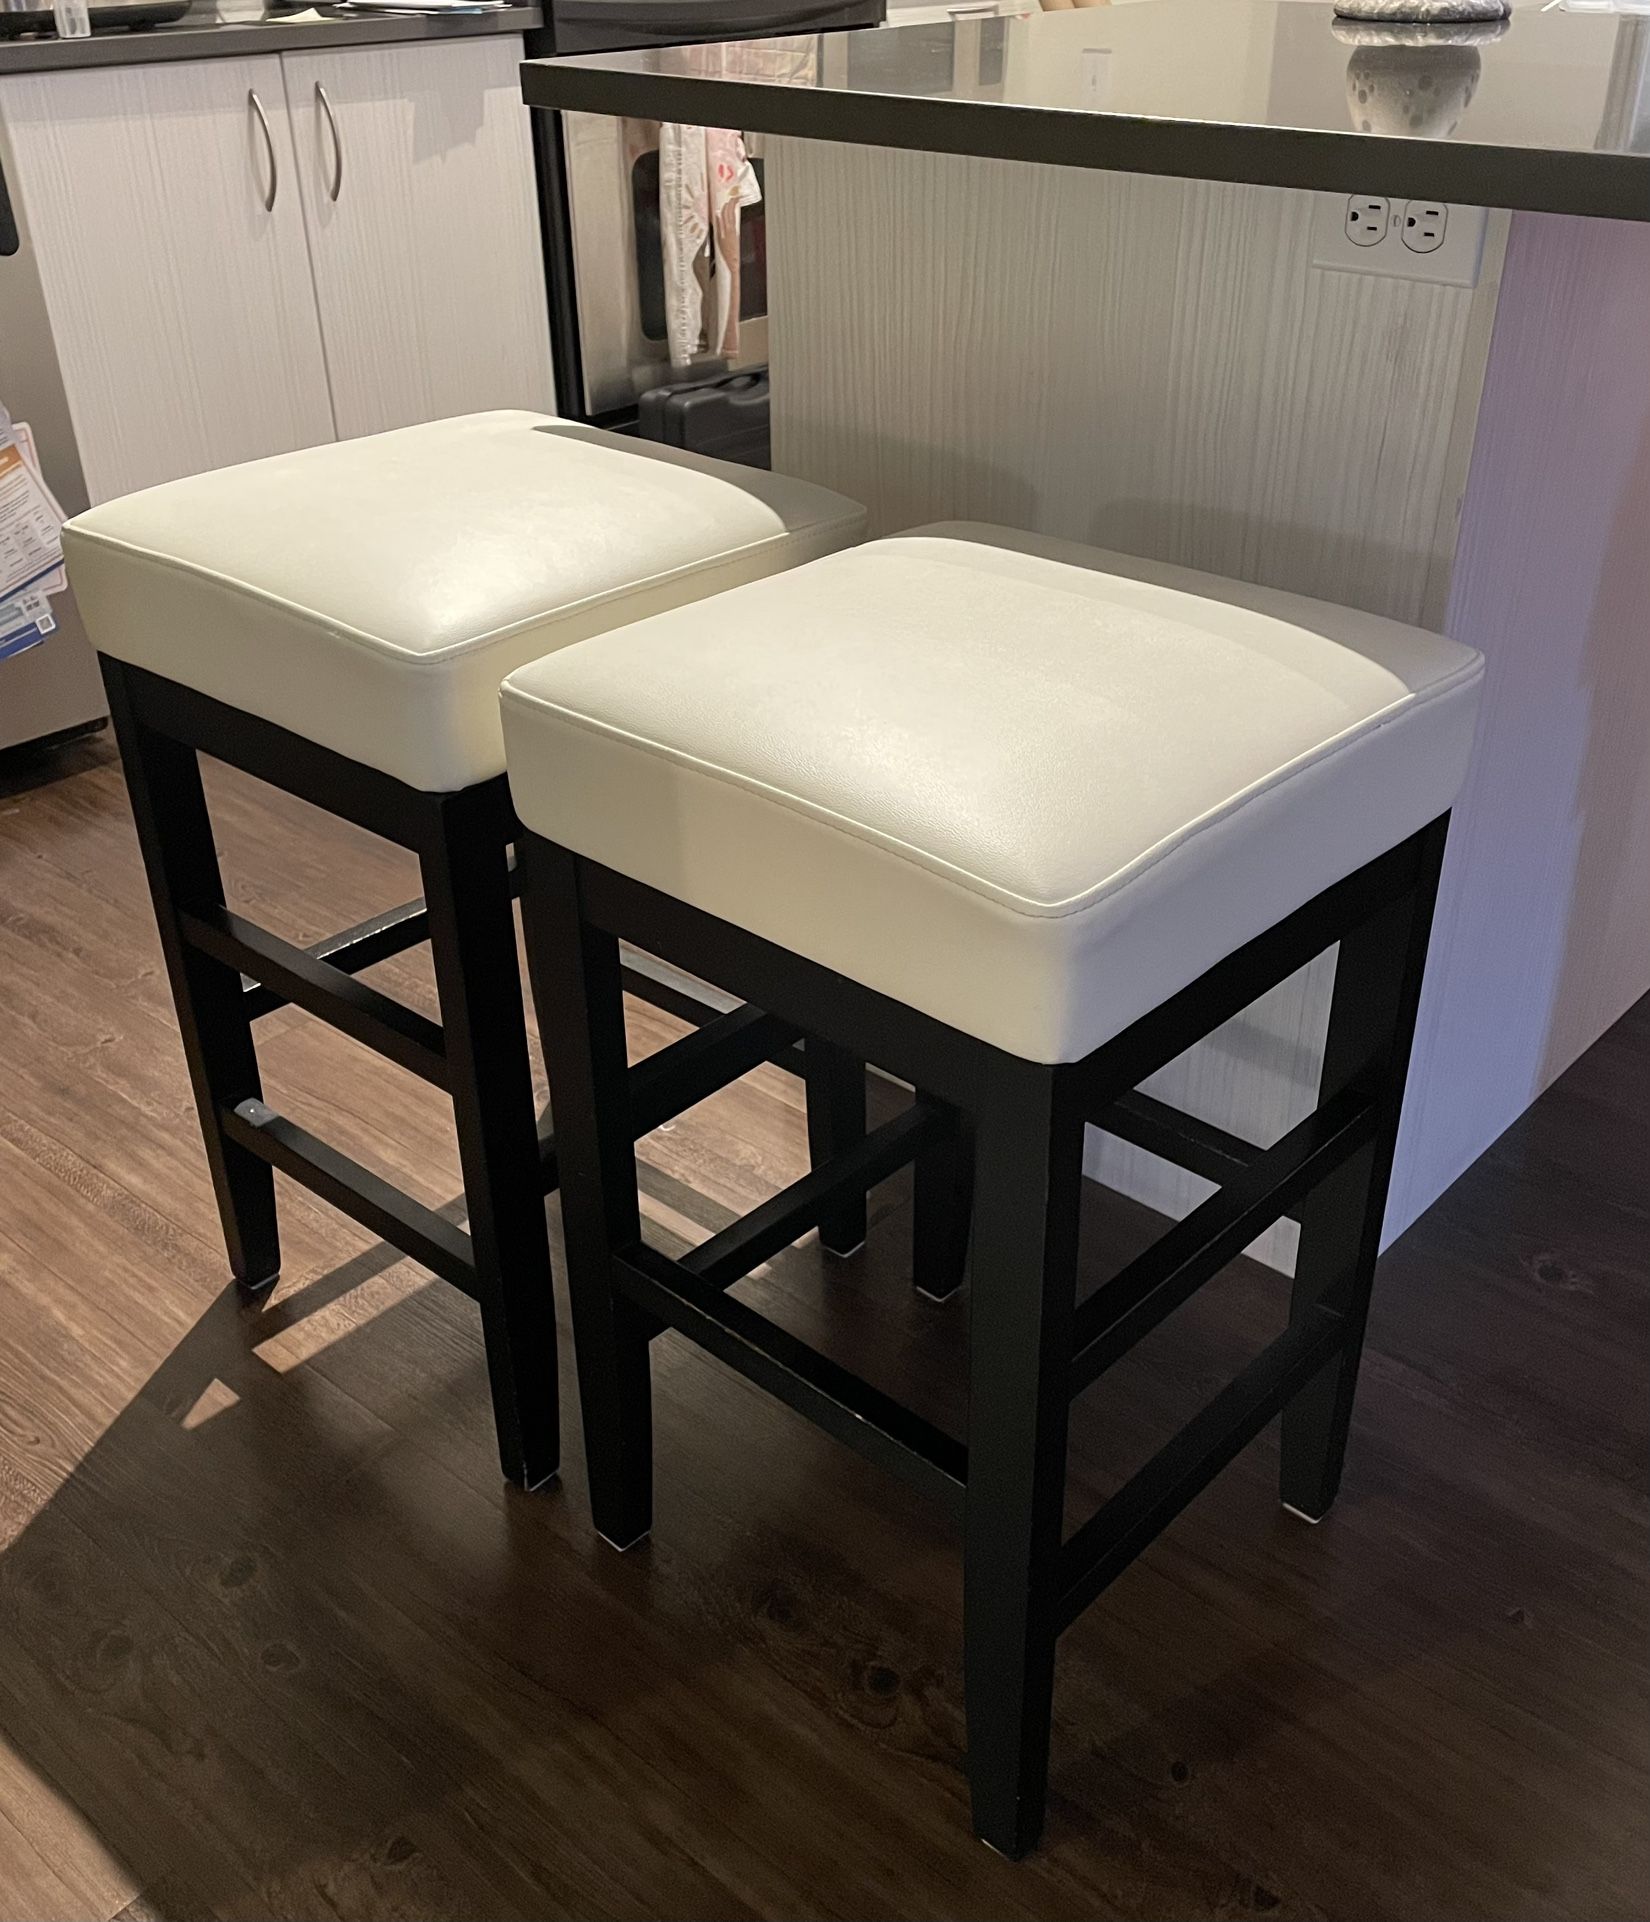 Stools with Leather Seats 